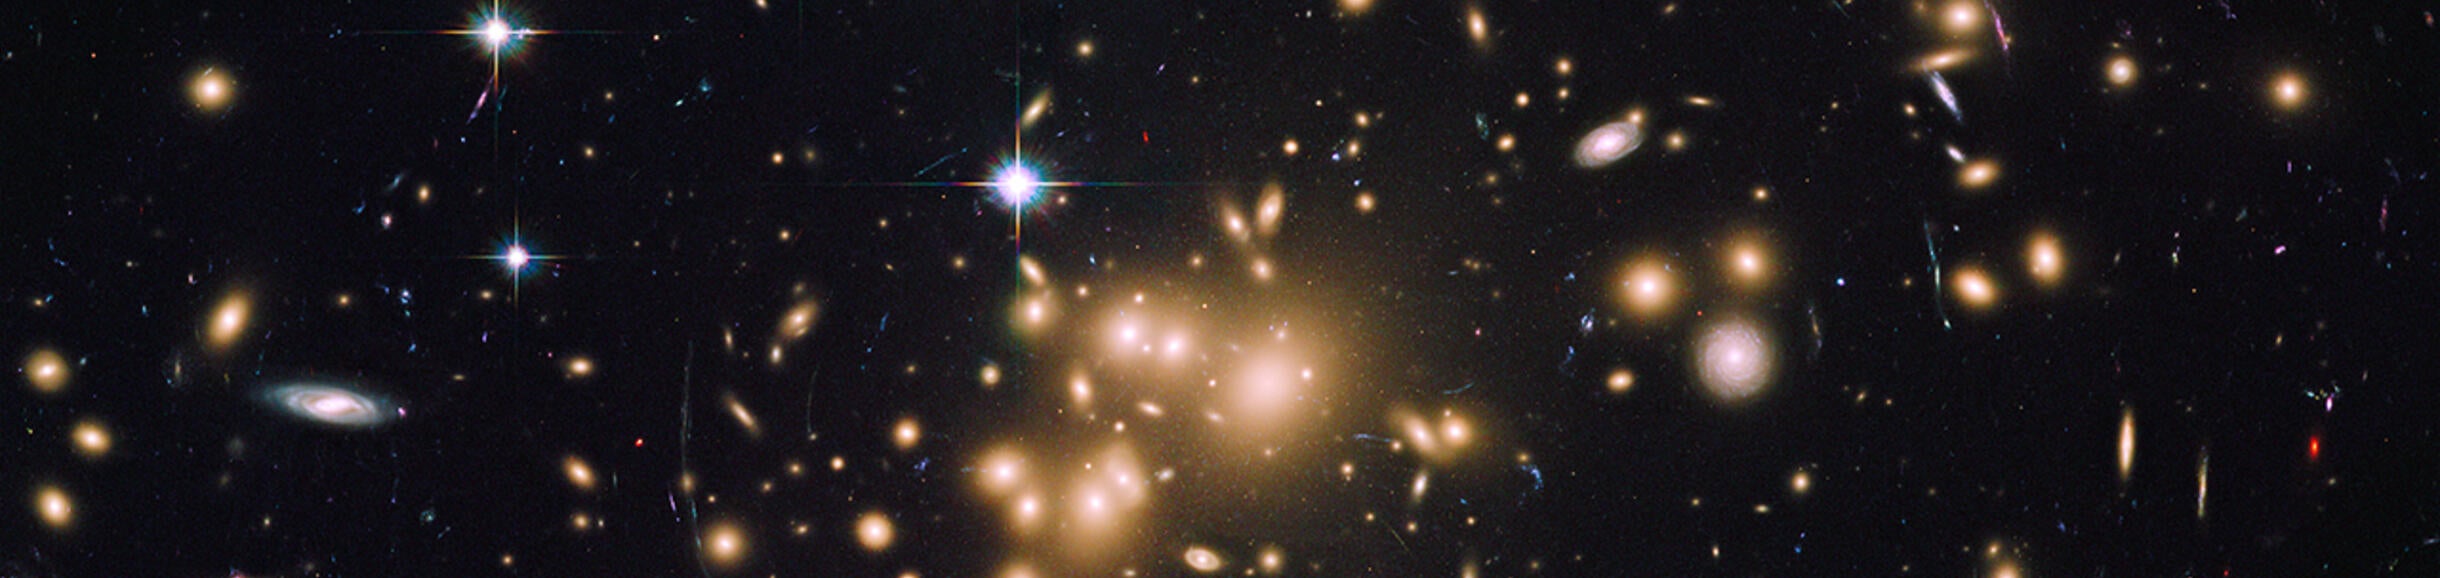 Abell 1689 galaxy cluster. The ultraviolet image (purple) was taken by Prof. Siana's group. 